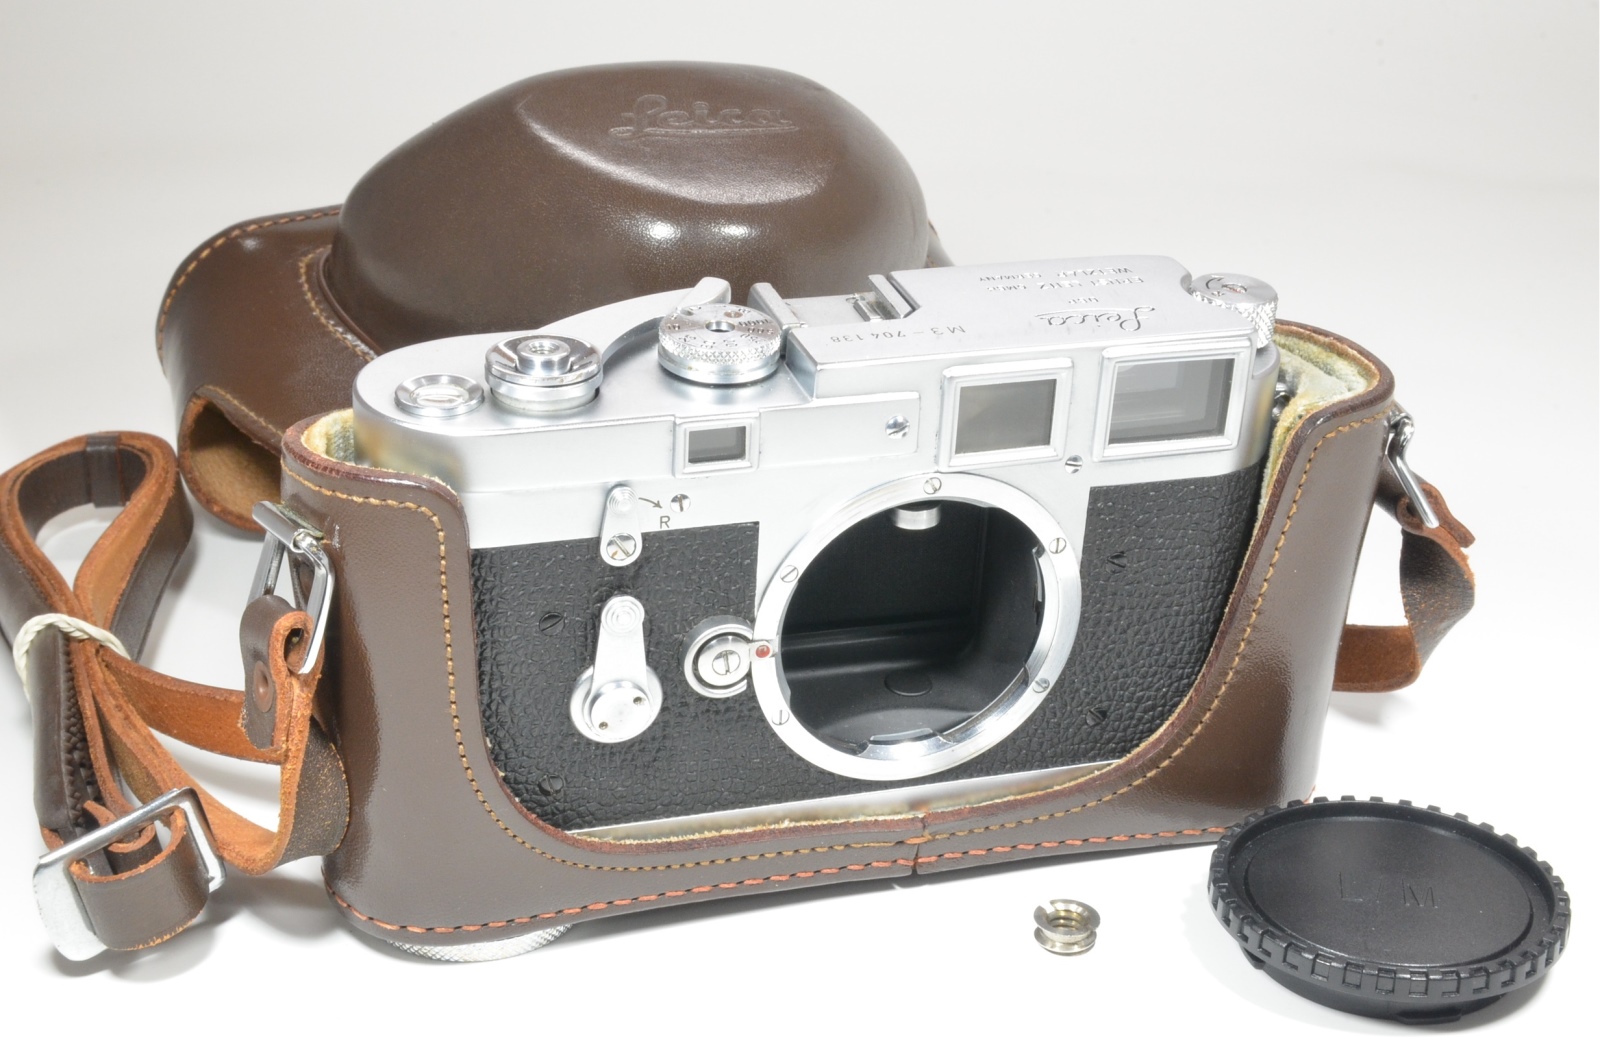 leica m3 double stroke s/n 704138 year 1954 with full leather case